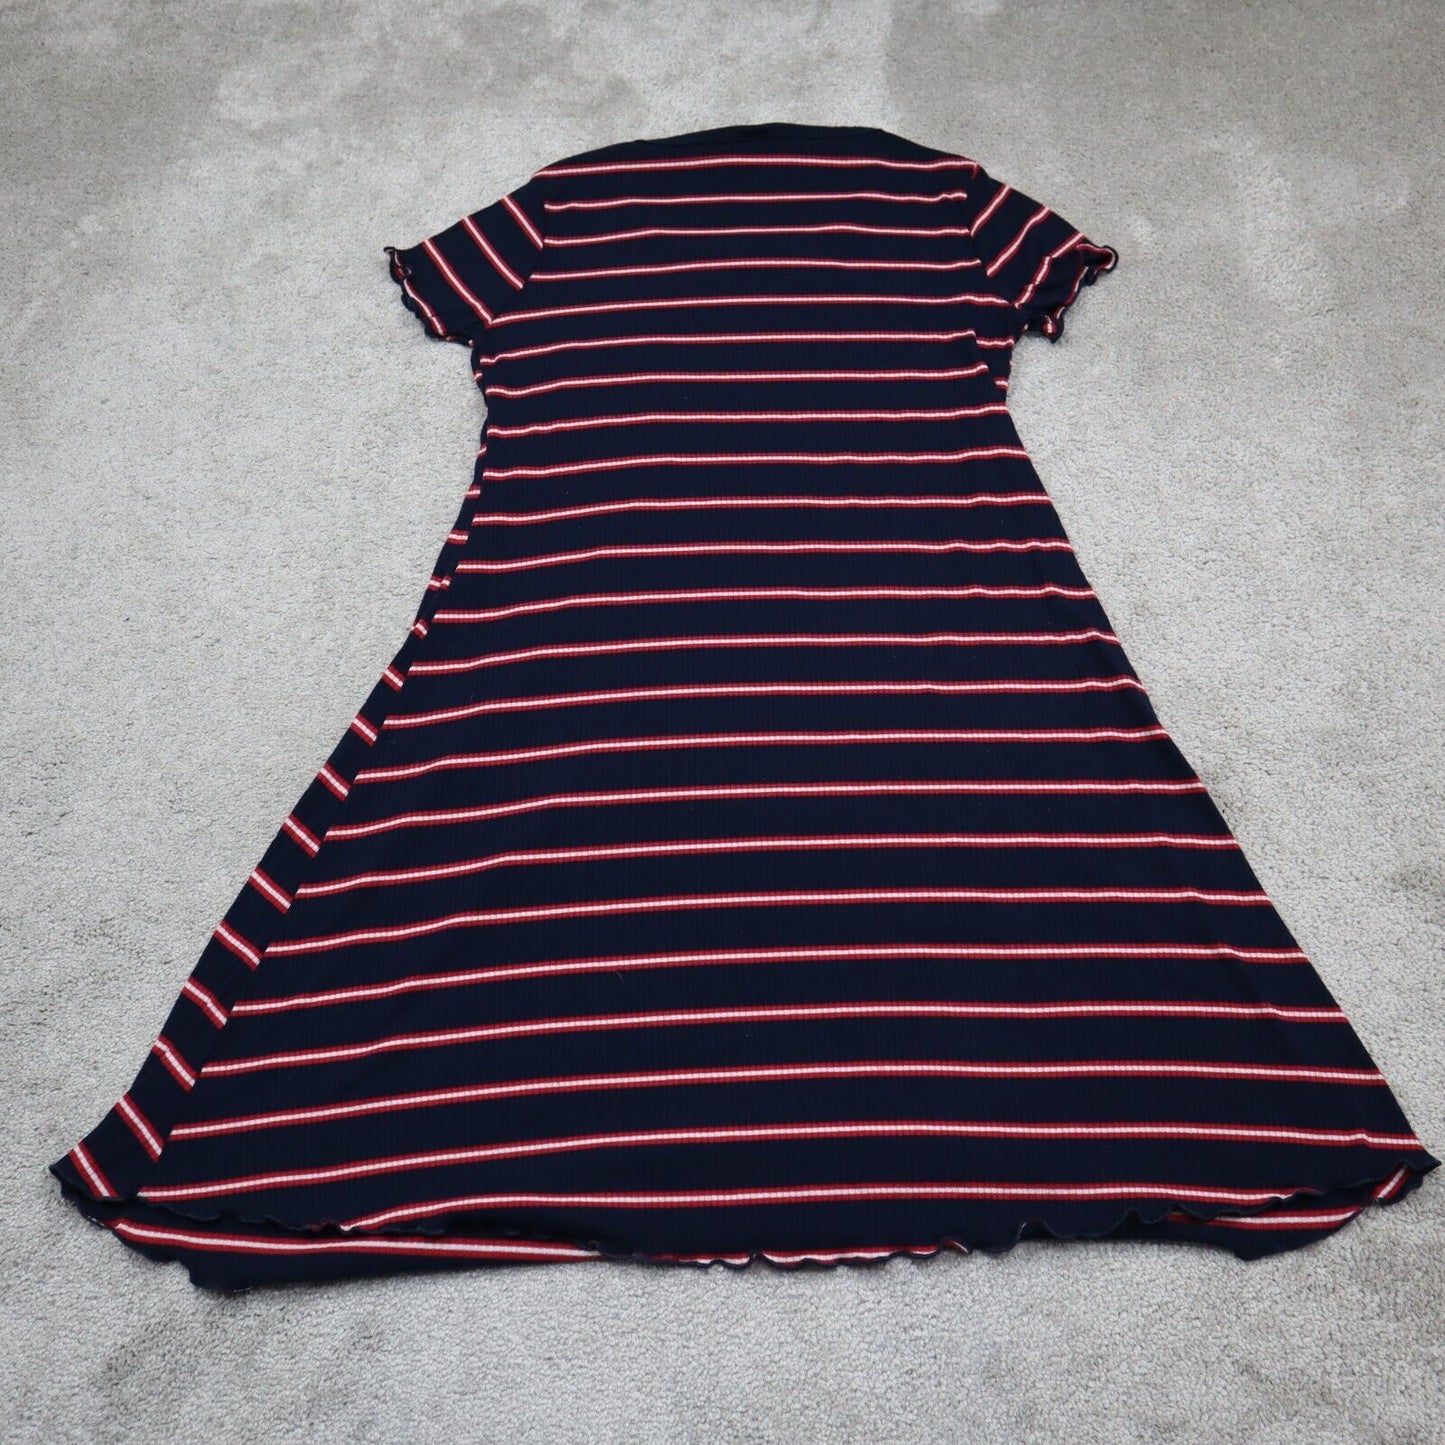 Mossimo Womens Sweater Dress Long Sleeve Round Neck Striped Black Red Size S